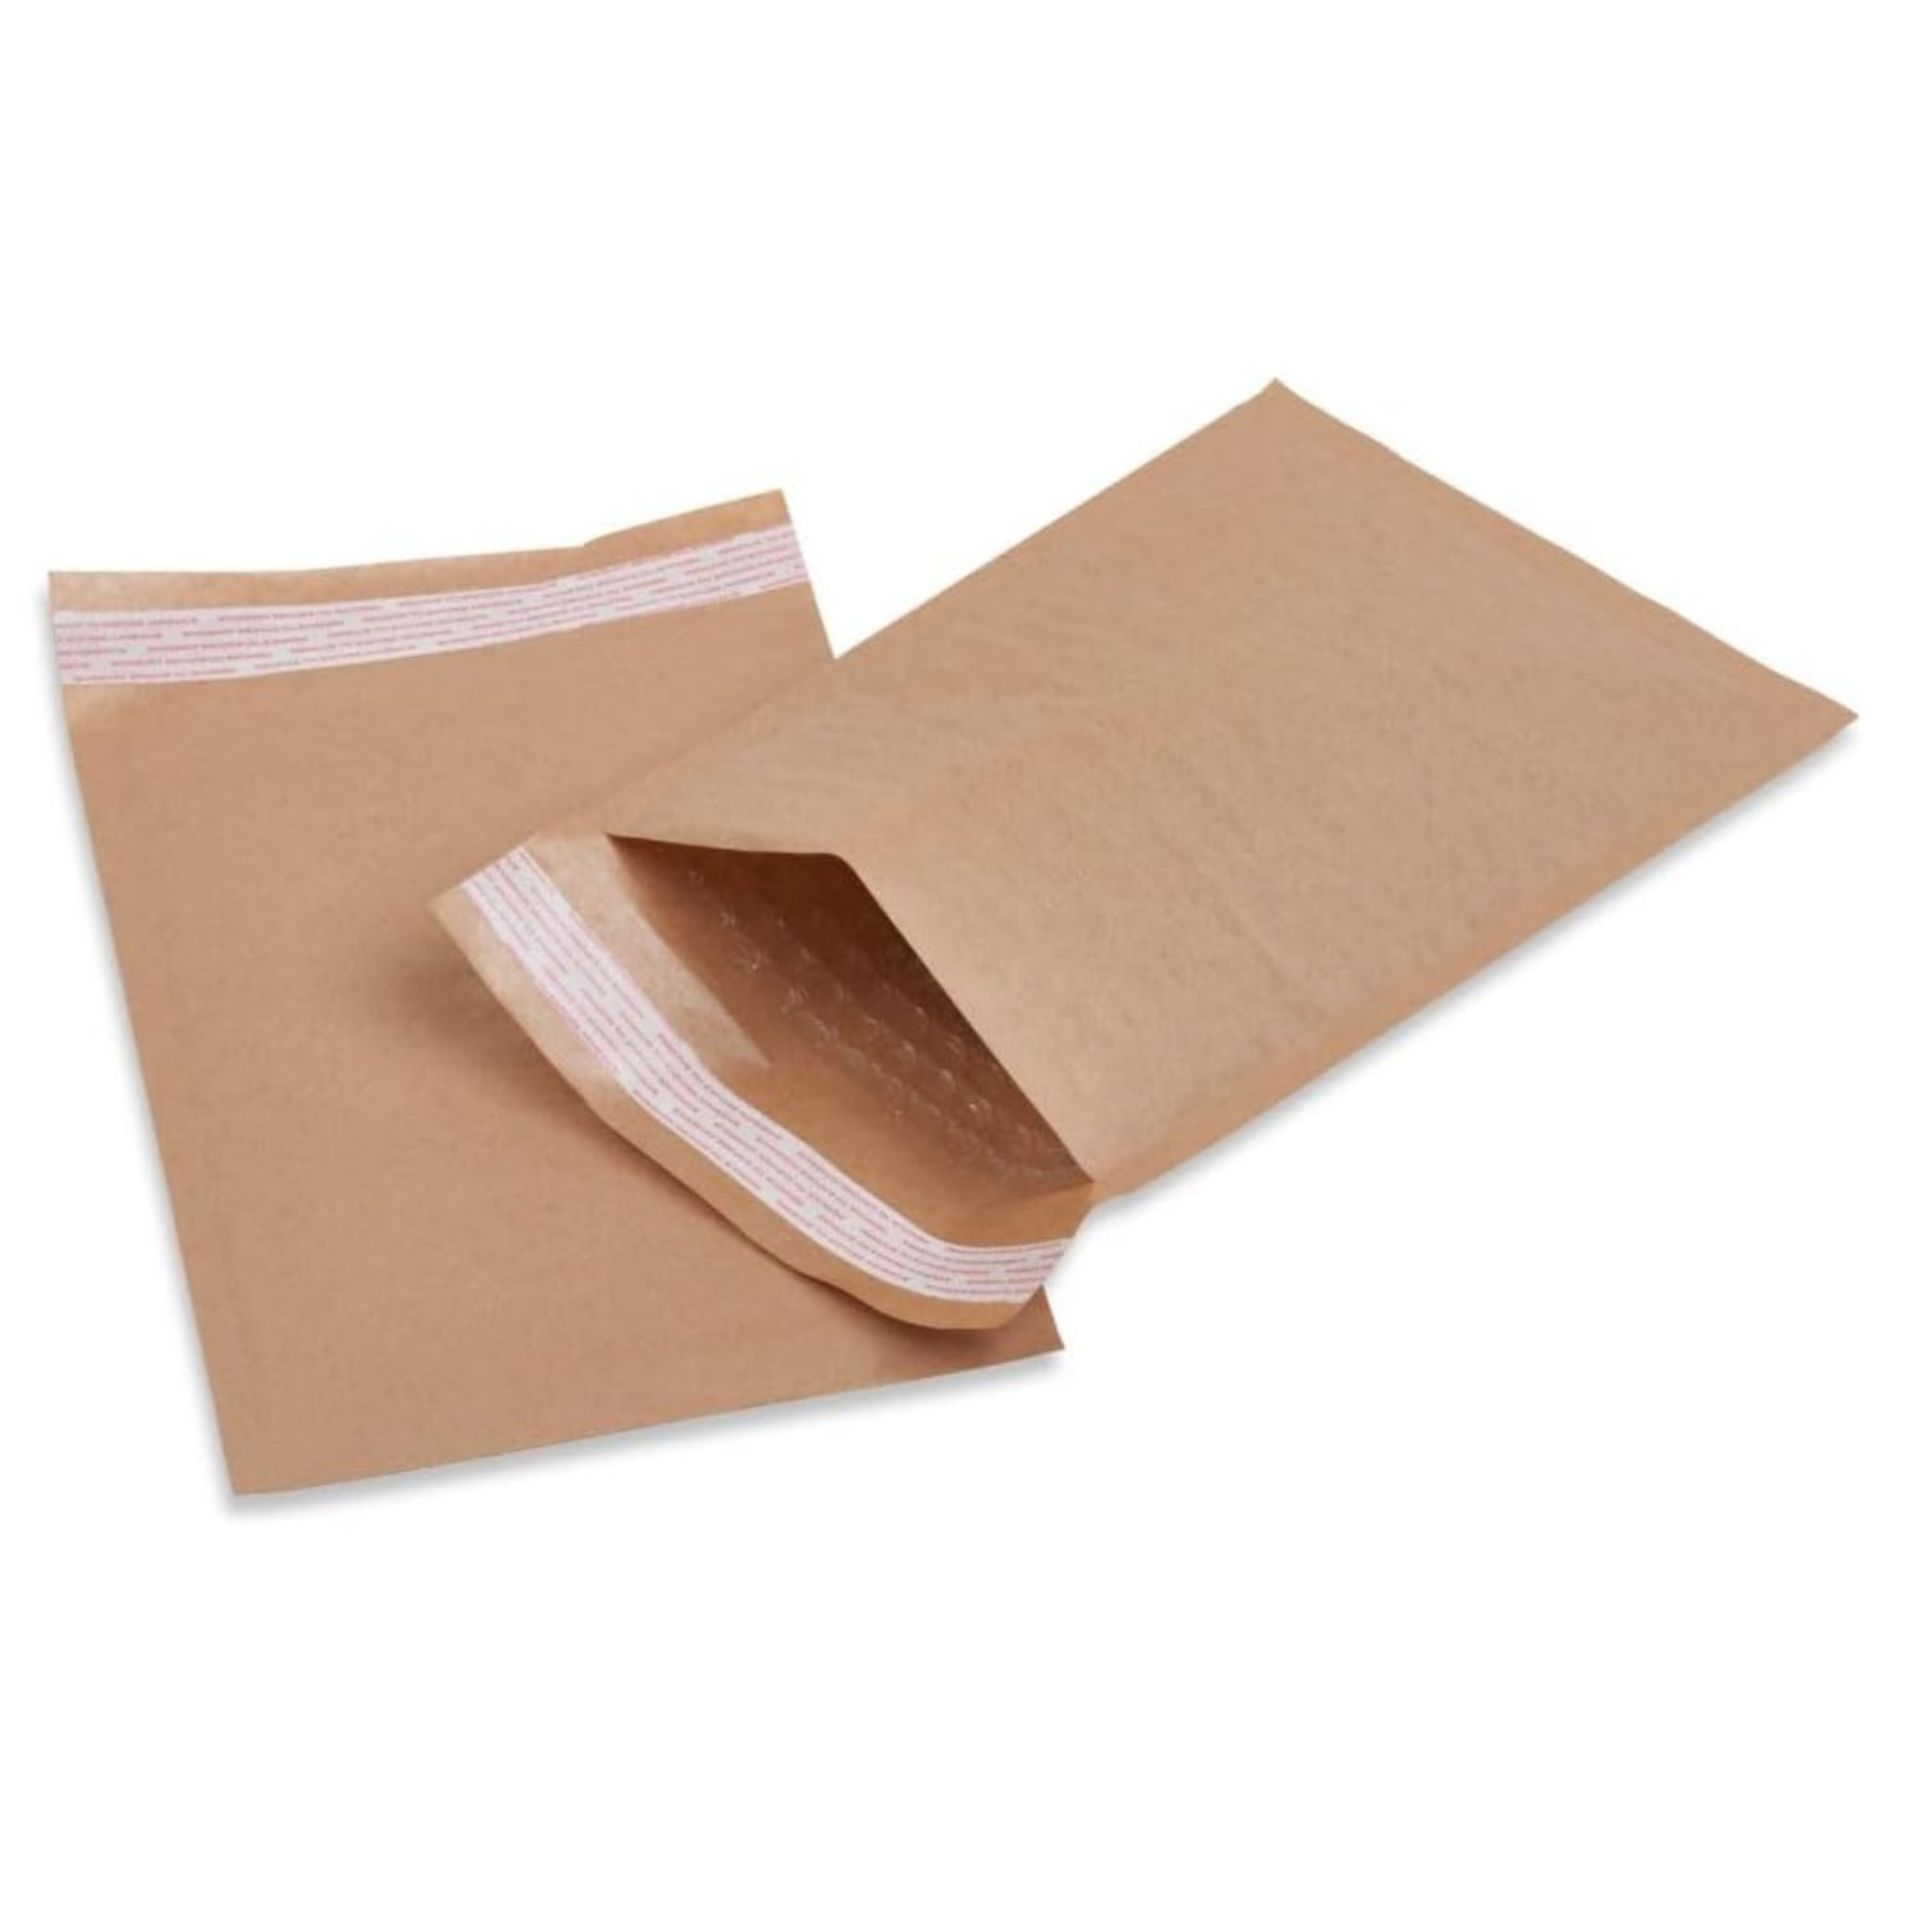 10 BOXES OF PAPER BAG ENVELOPES BUBBLE BAGS 100 PACK PEEL AND SEAL TOUGH LIGHT PADDED (200 X 260MM) - Image 3 of 4